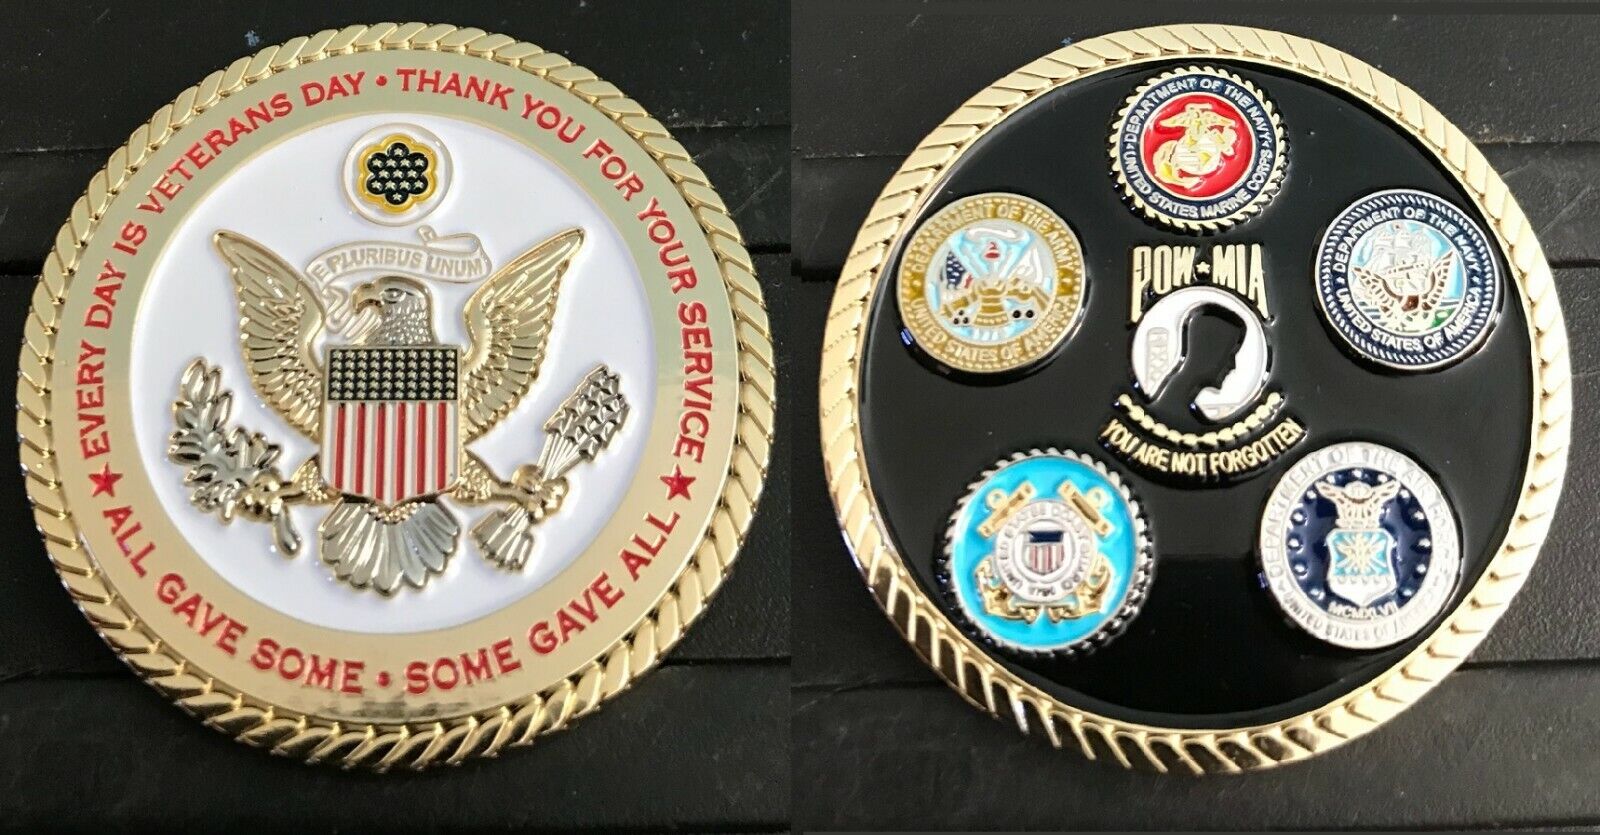 VETERAN COIN: ALL GAVE SOME. SOME GAVE ALL. 1.75\